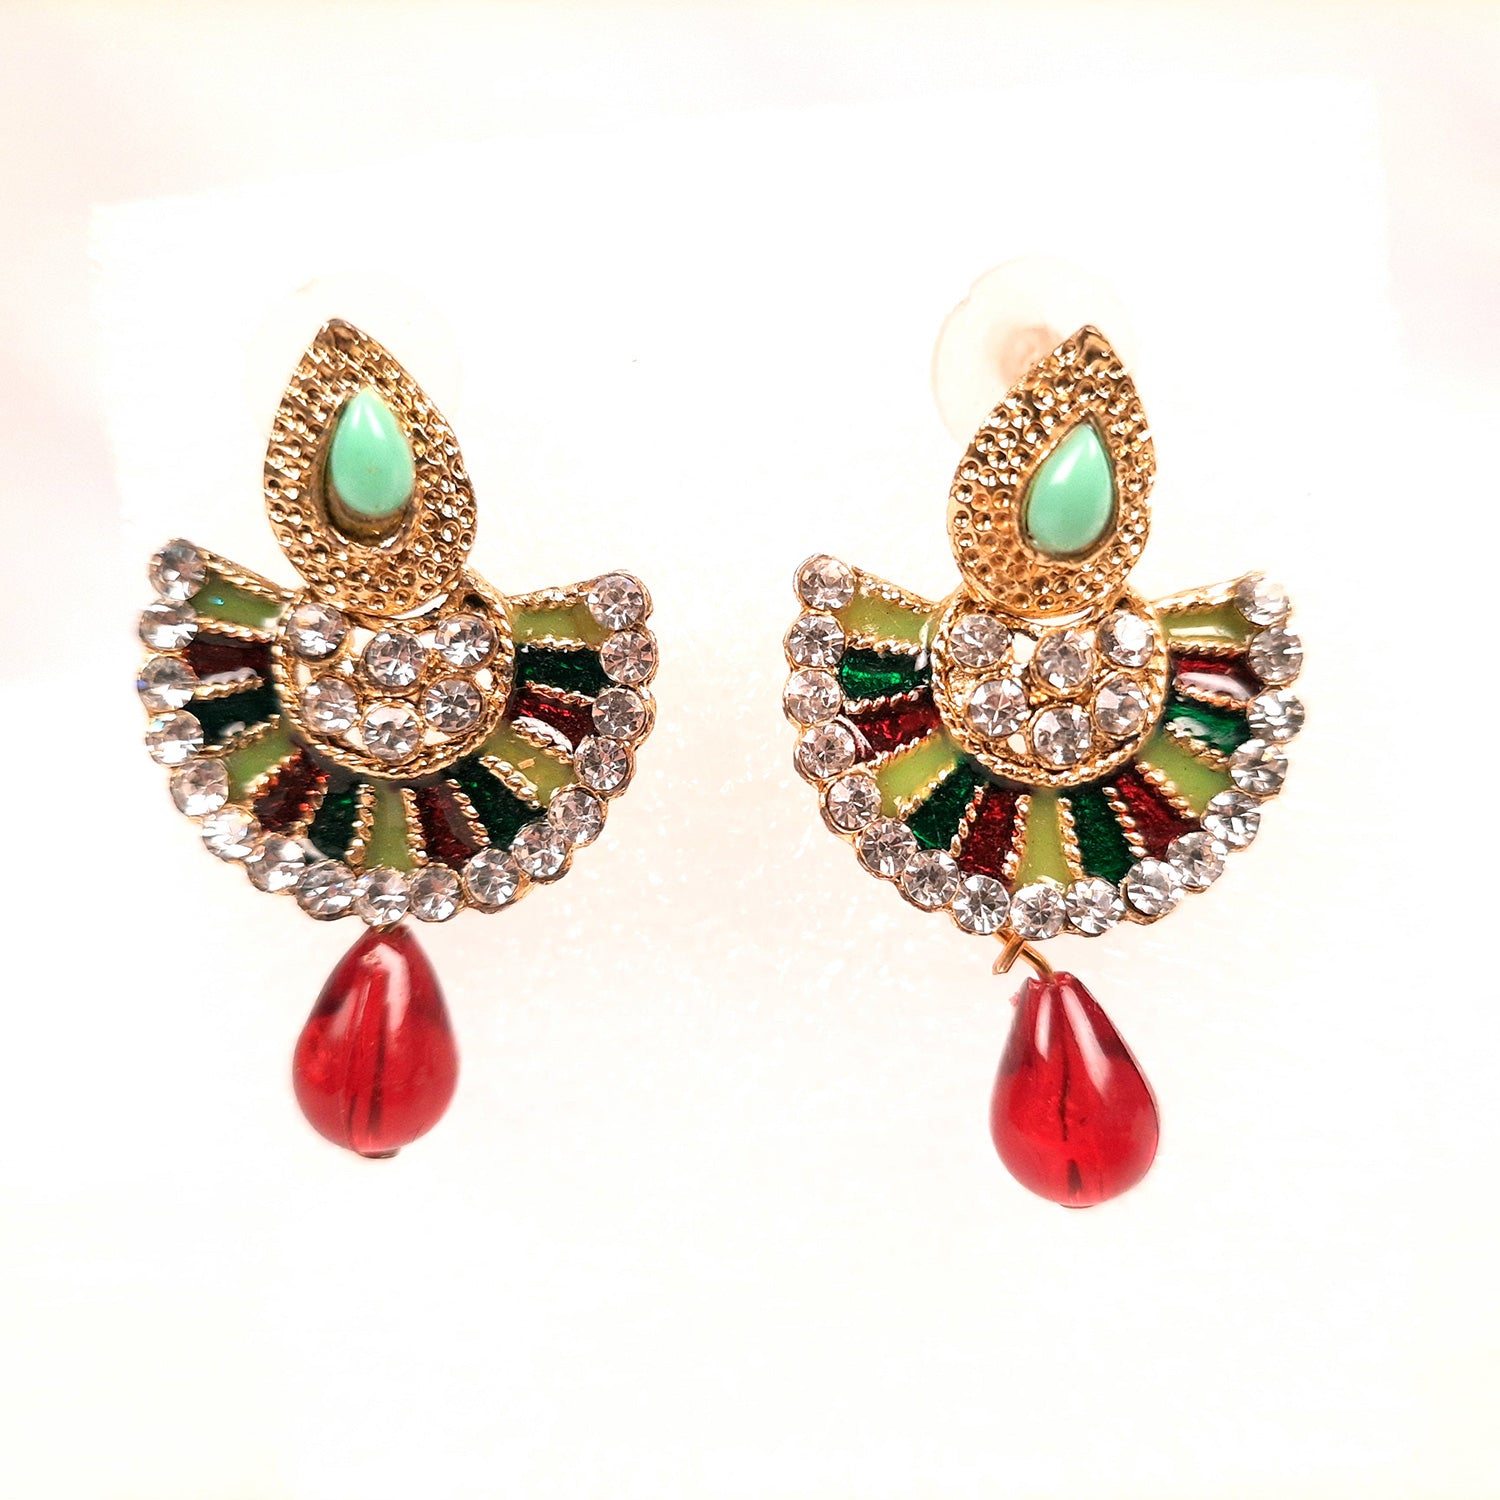 Earring Stud - Multicolour Floral Drop Earrings - for Girls and Women | Latest Stylish Fashion Jewellery | Gifts for Her, Friendship Day, Valentine's Day Gift - apkamart